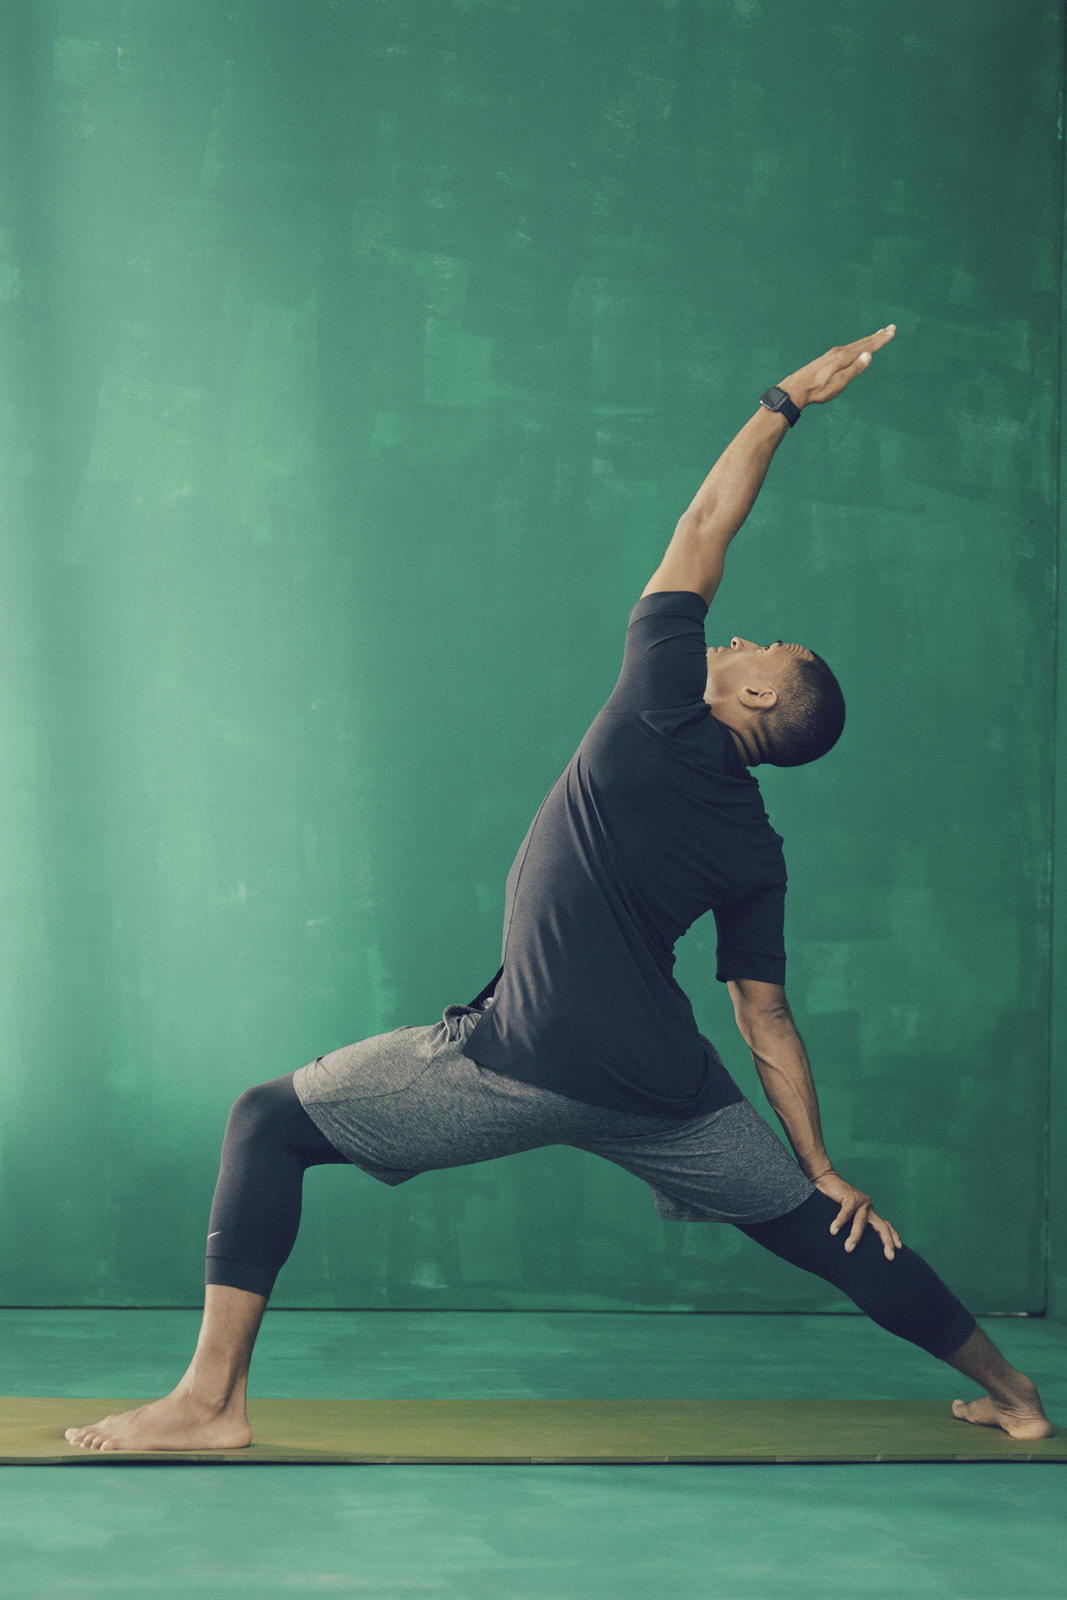 Nike Invests Big in Menswear With New Yoga Apparel Collection